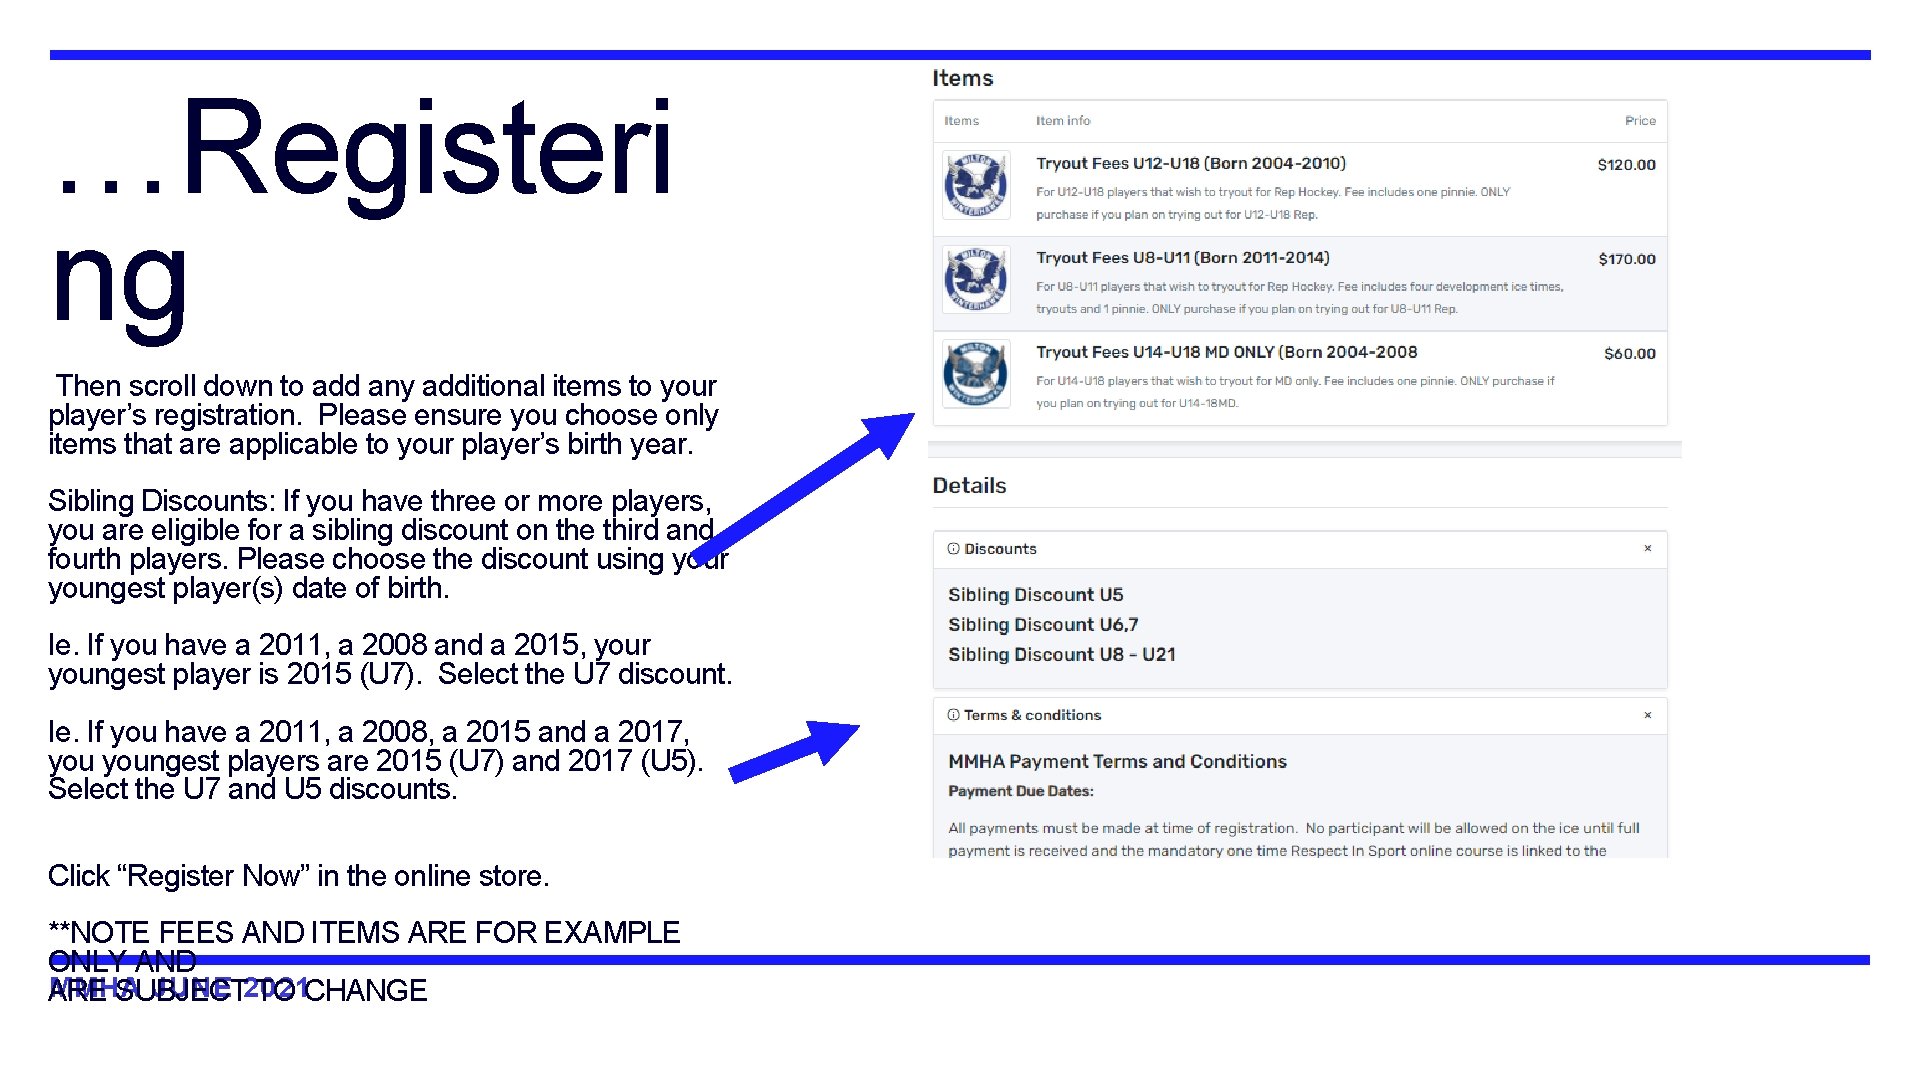 …Registeri ng Then scroll down to add any additional items to your player’s registration.